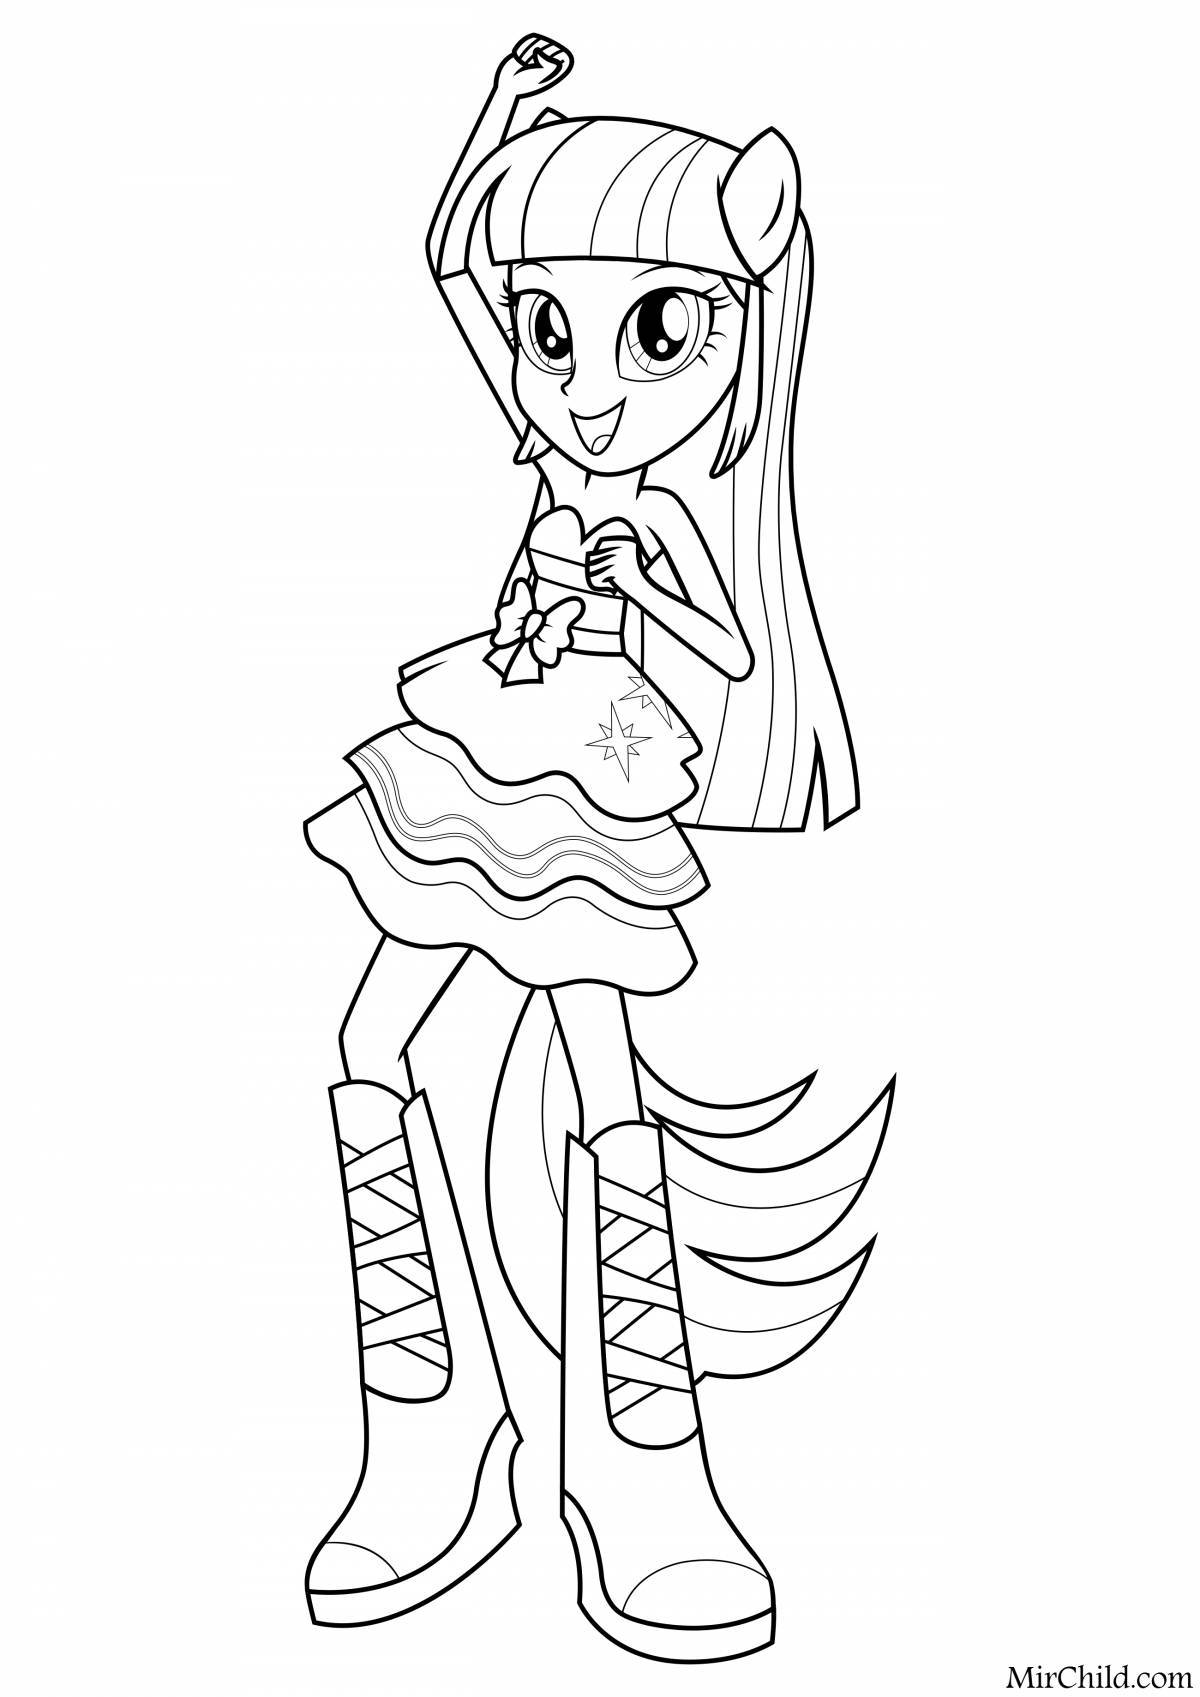 Playful equestria girls coloring page